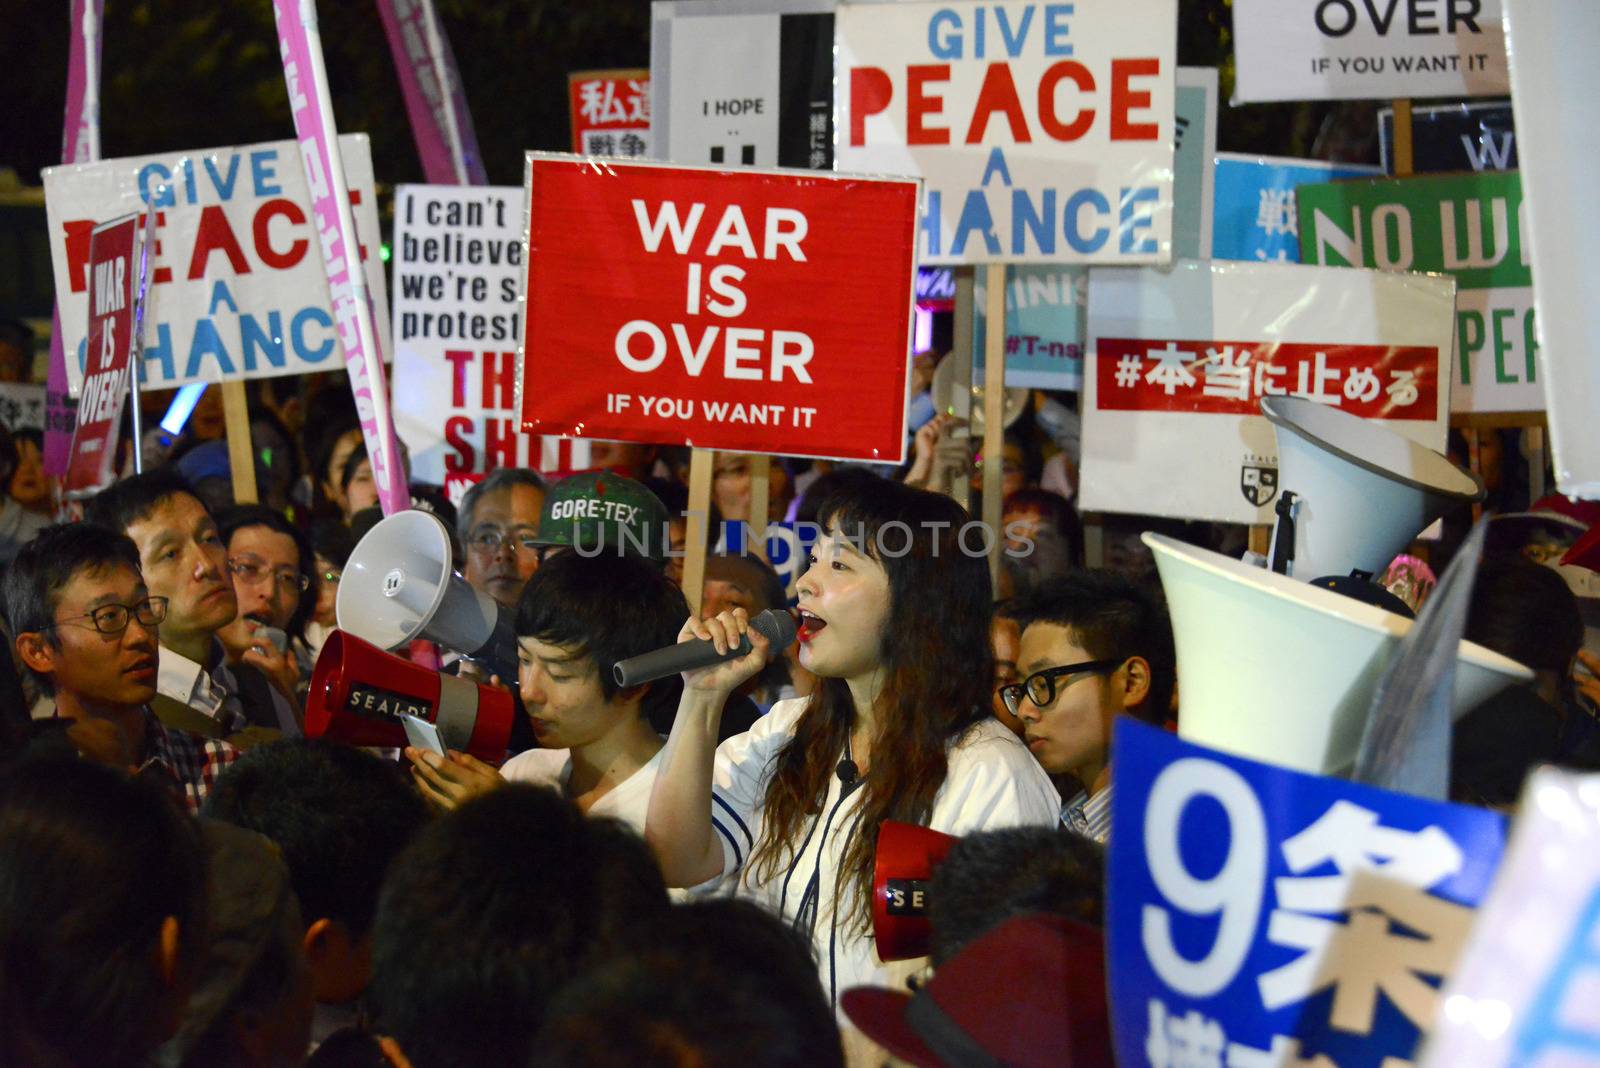 JAPAN, Tokyo: Protestors hold signs near Japanese parliament in Tokyo, Japan, on September 15, 2015 during a demonstration against security law. Demonstrators claim Japanese Prime minister Shinzo Abe's resignation.